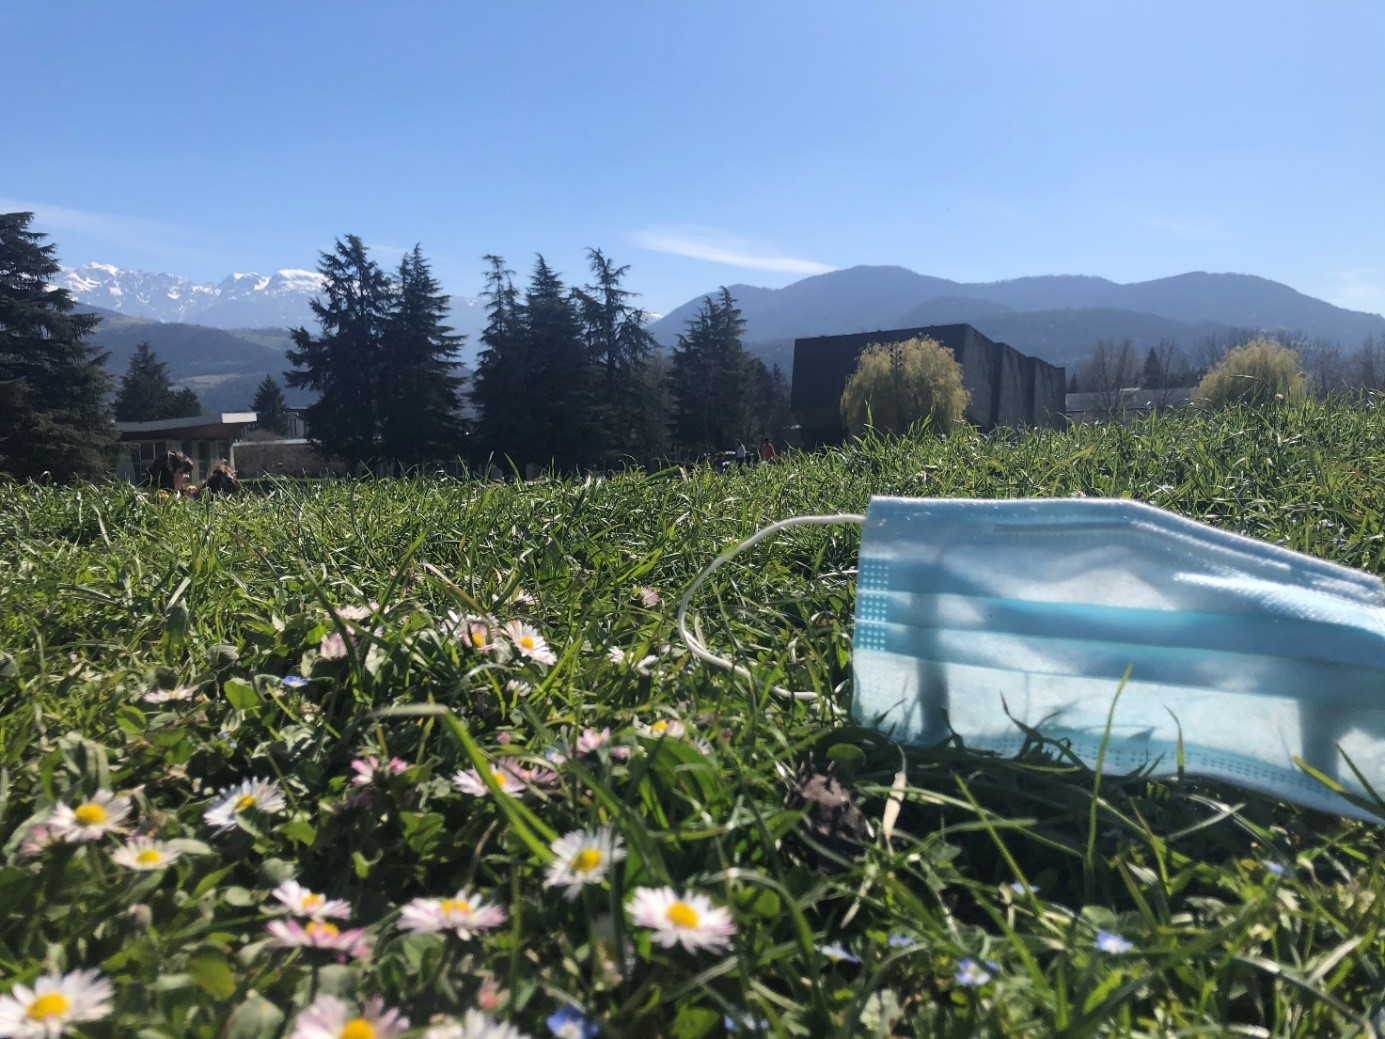 The compulsory mask protects us from the virus, but does not prevent us from enjoying the sun and the flowers on the wonderful campus of the Alps.